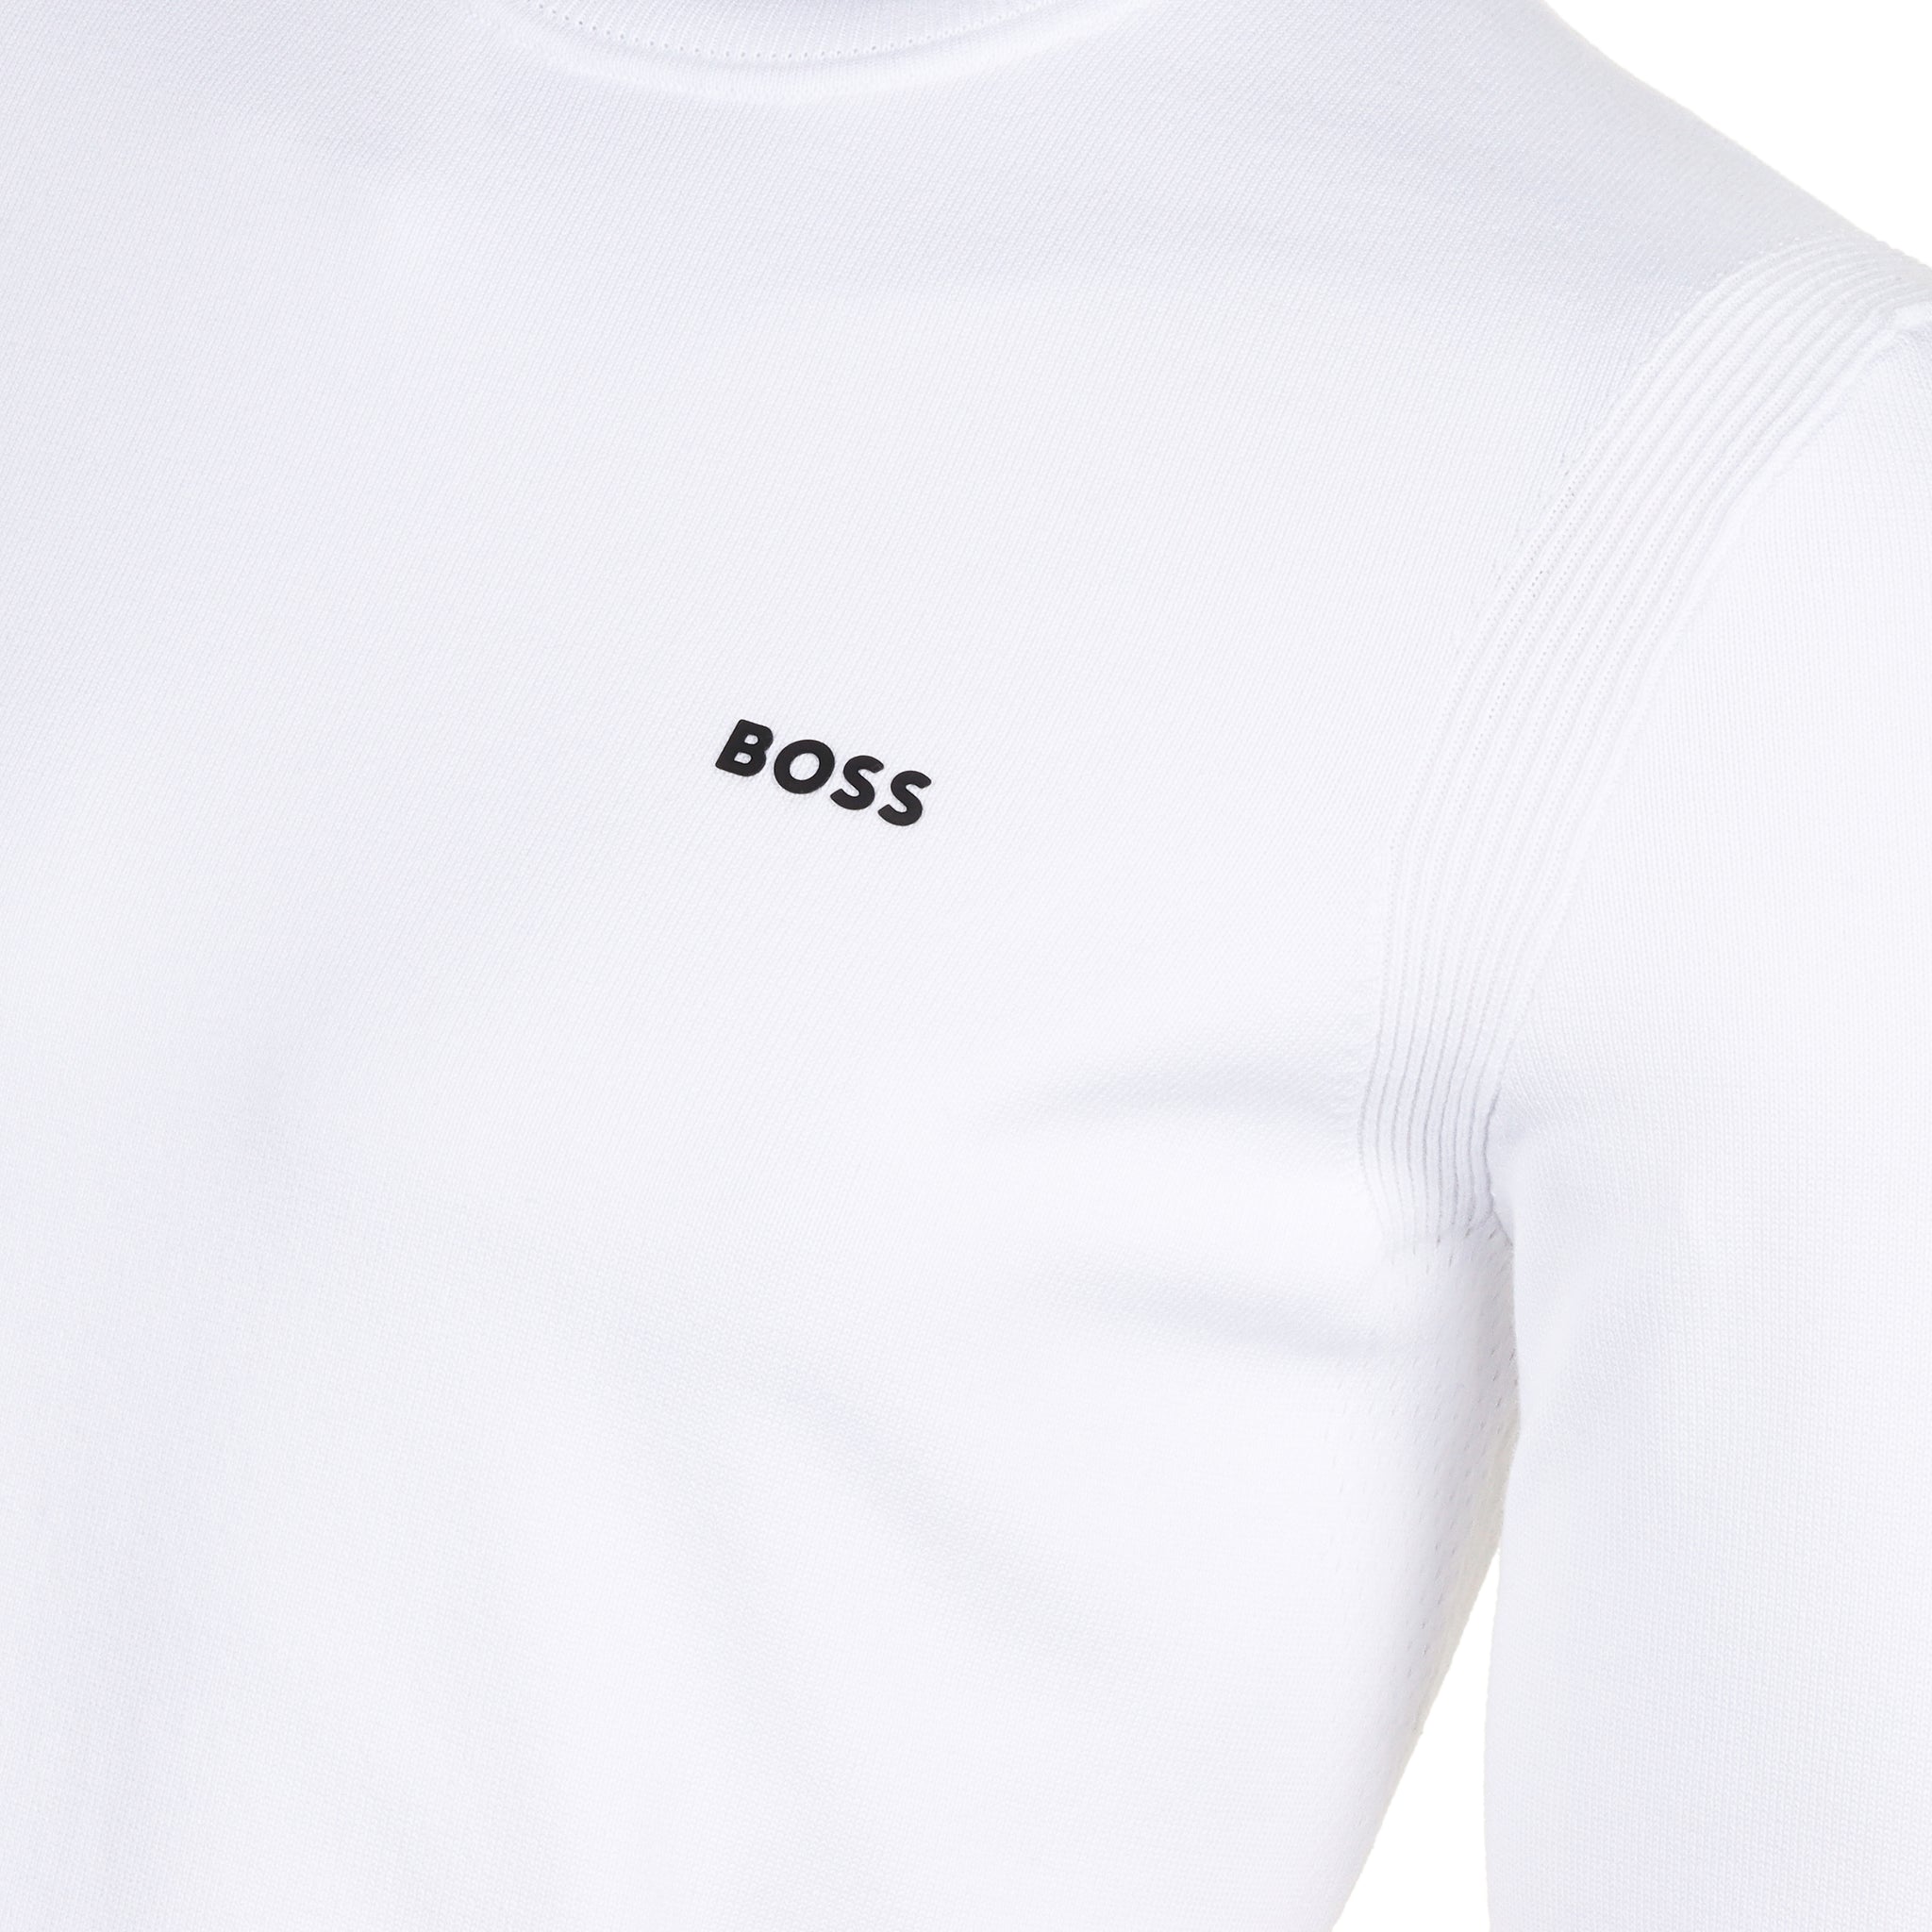 boss-ever-x-crew-neck-sweater-wi23-50498539-white-100-function18